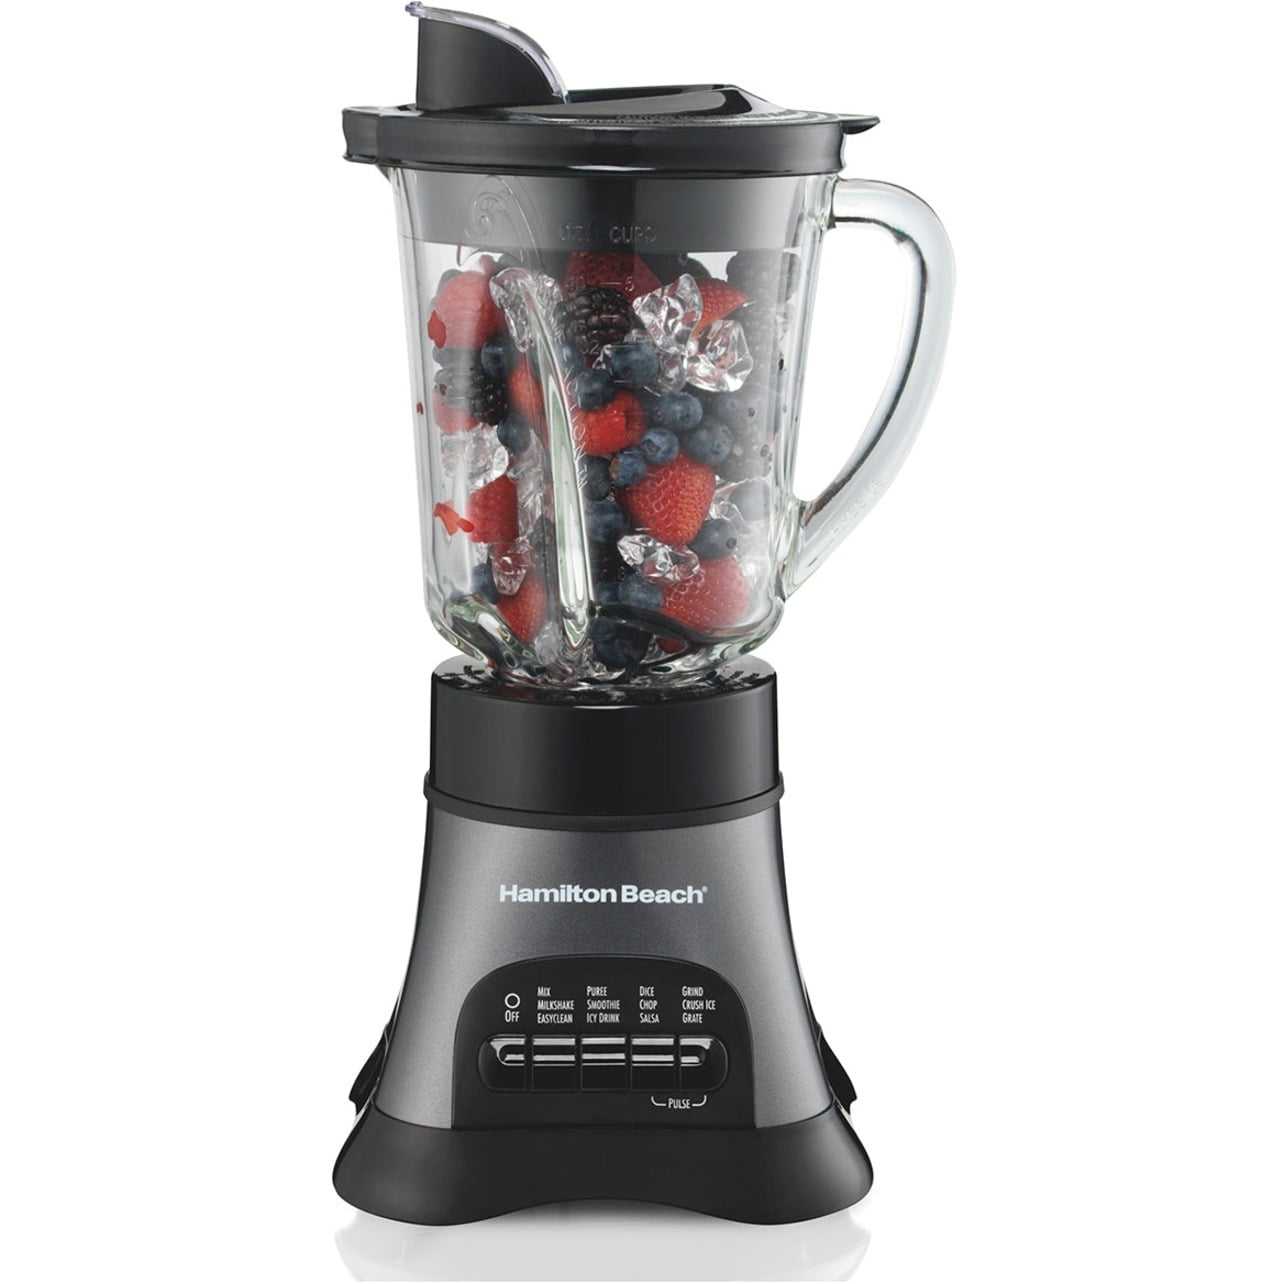 Dropship Hamilton Beach Smoothie Blender, 48 Oz Jar, 12 Blending Functions,  Black, 50180 to Sell Online at a Lower Price